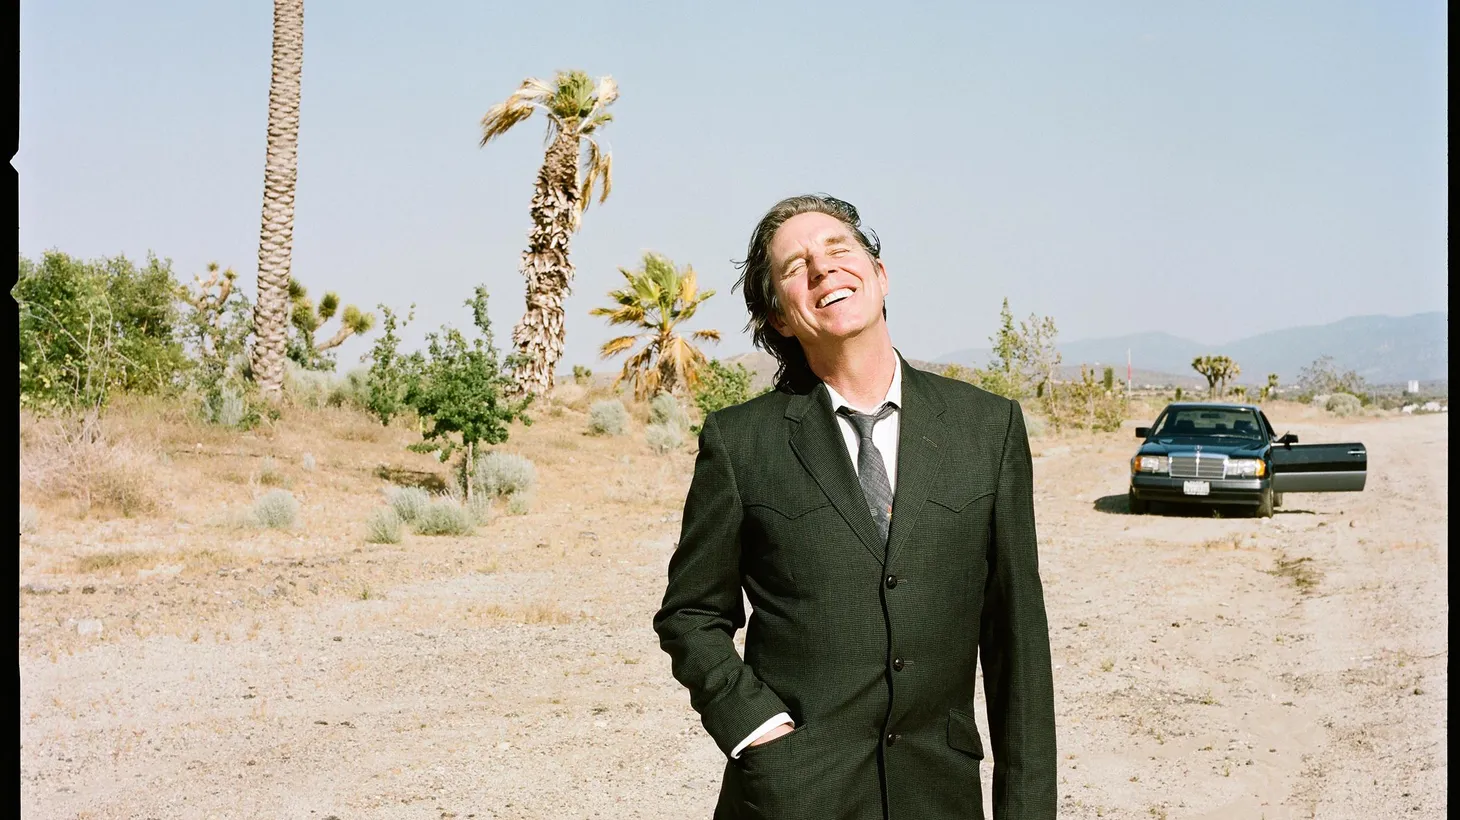 John Doe co-founded SoCal's proudest entry in the world of punk, the band X. He continues to shine in his solo career, where he leans towards deeply personal songs..